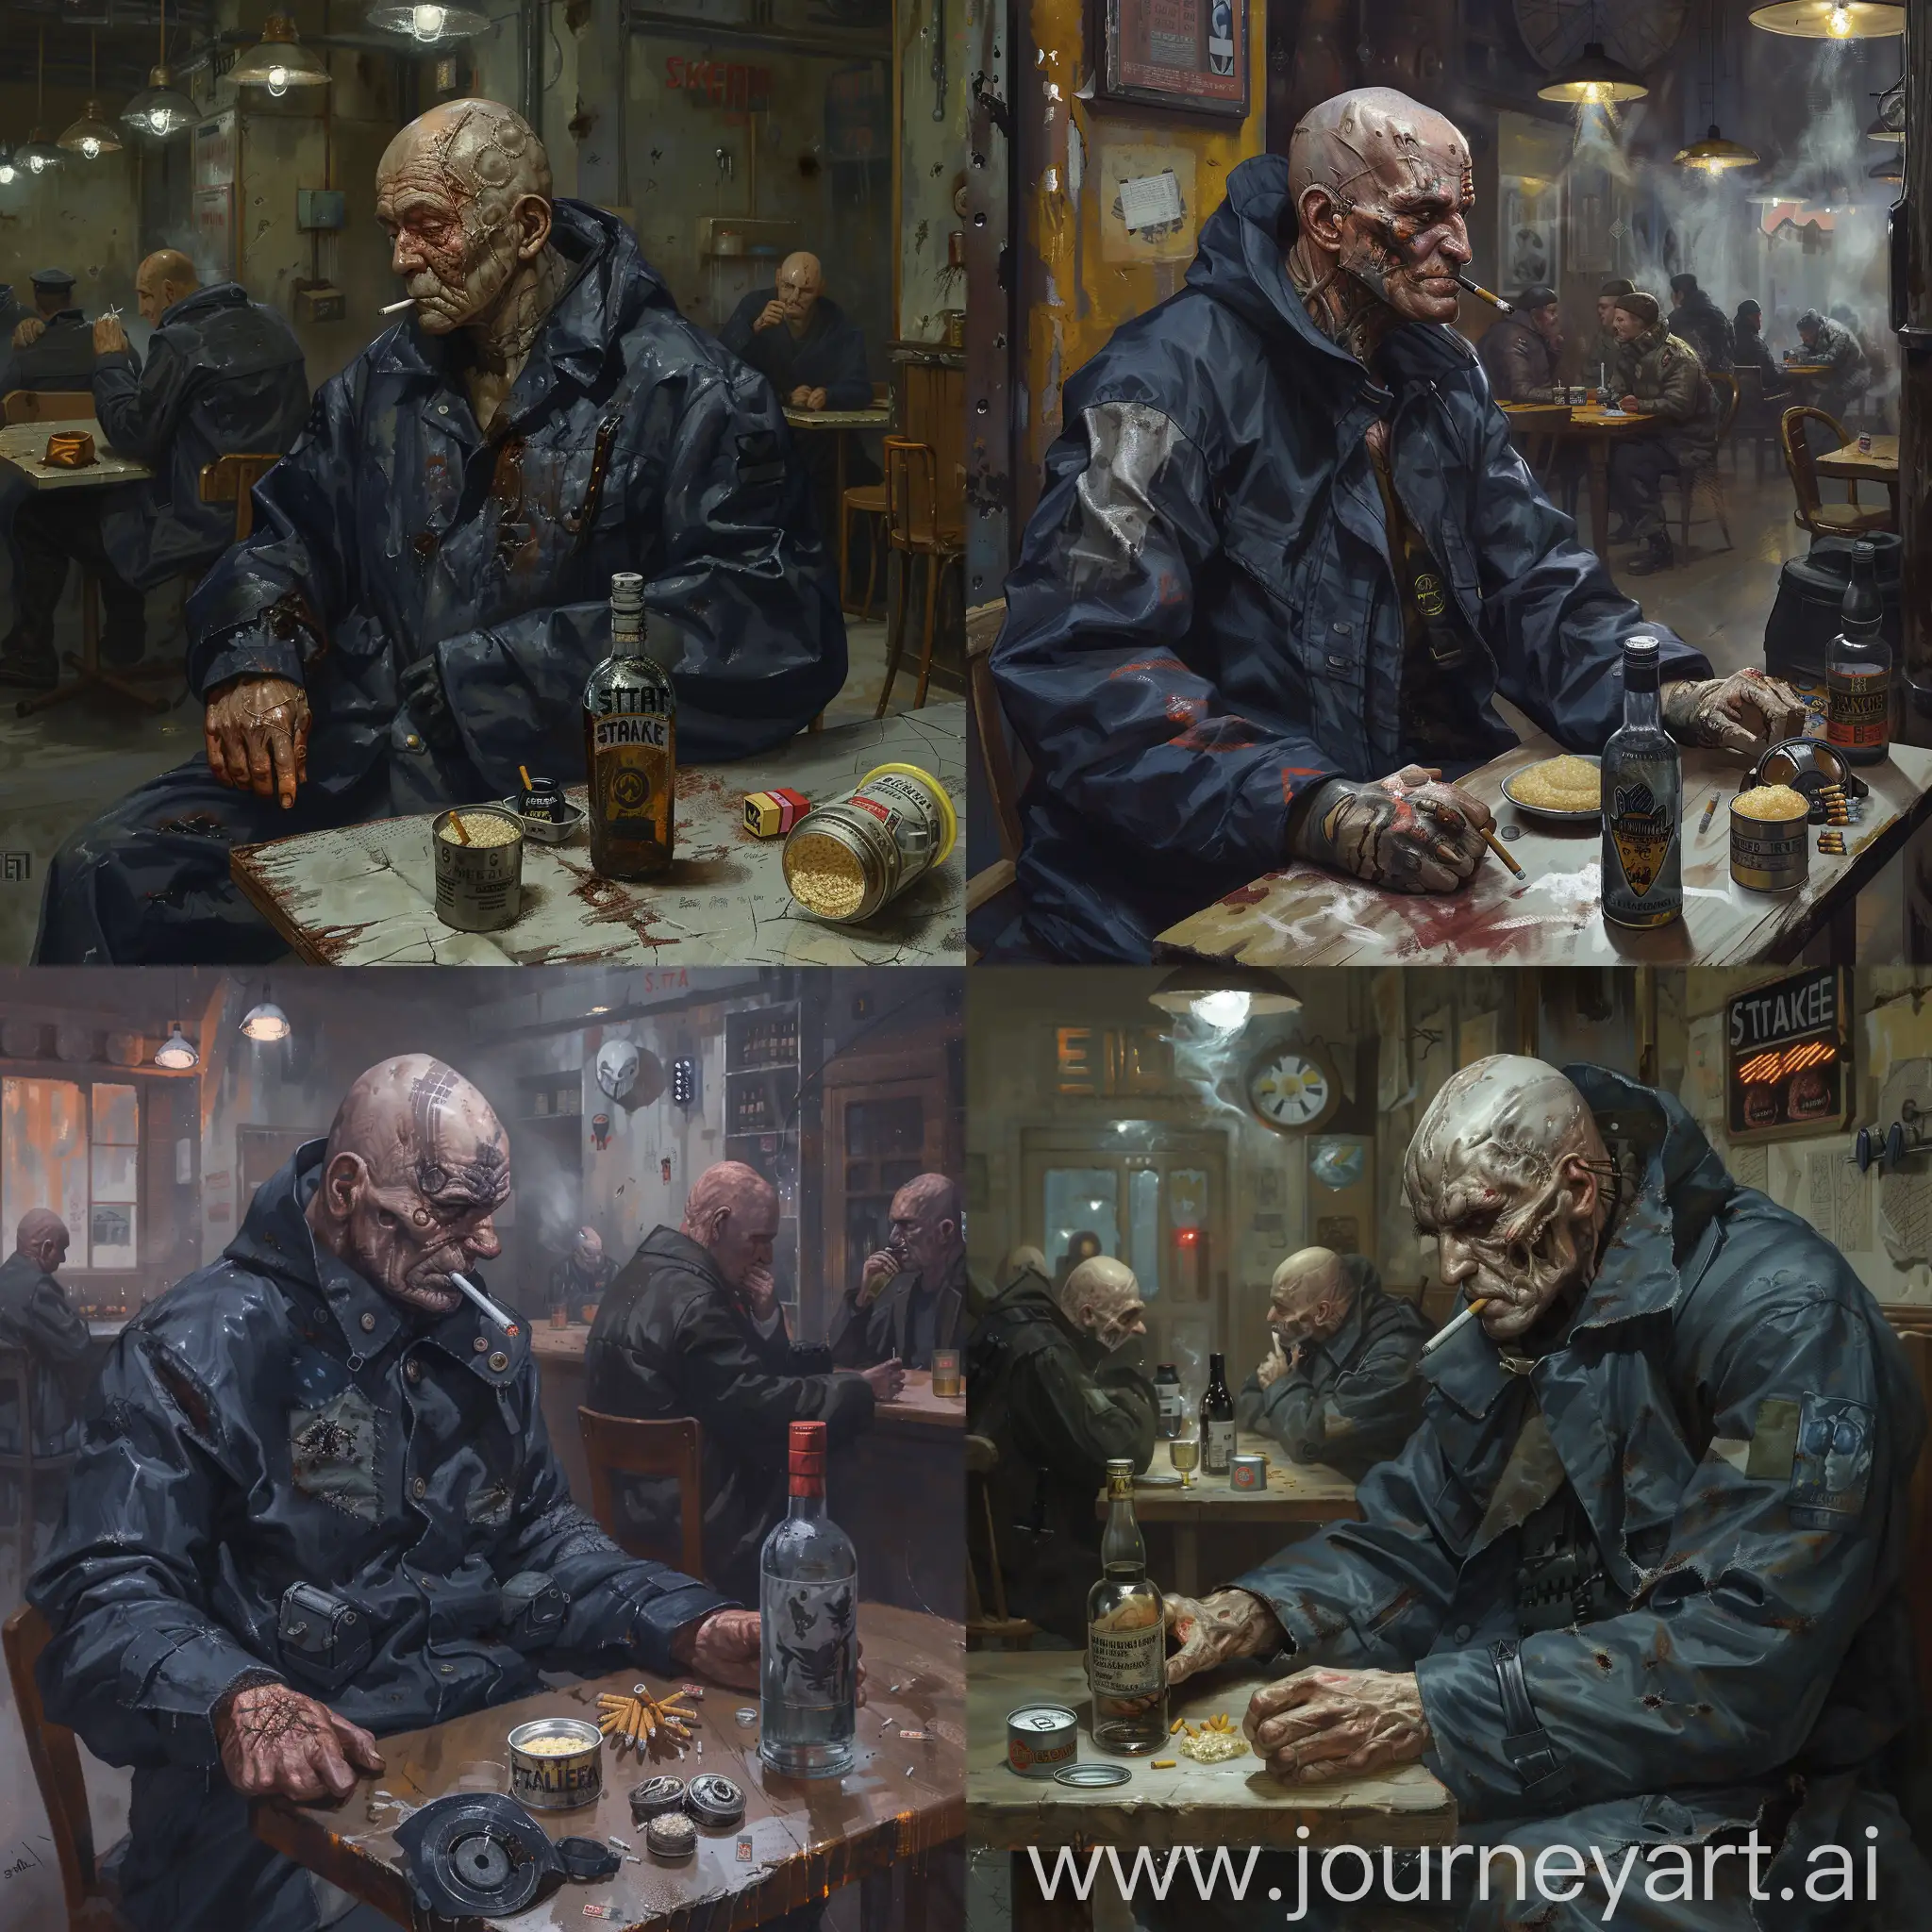 A mercenary from the universe of S.T.A.L.K.E.R, a mercenary dressed in a dark blue military raincoat, a gray military discharge on his body, a bald, mature man of 30 years, many scars on his face, a mercenary sitting in a small old Soviet bar at a separate table, a bottle of vodka in his hand, a cigarette in his mouth, on the table where the mercenary is sitting is laid out: one gas mask, one pack of cigarettes, and one open can of porridge, the bar is dimly lit, you can see several other stalkers at other tables talking to each other.